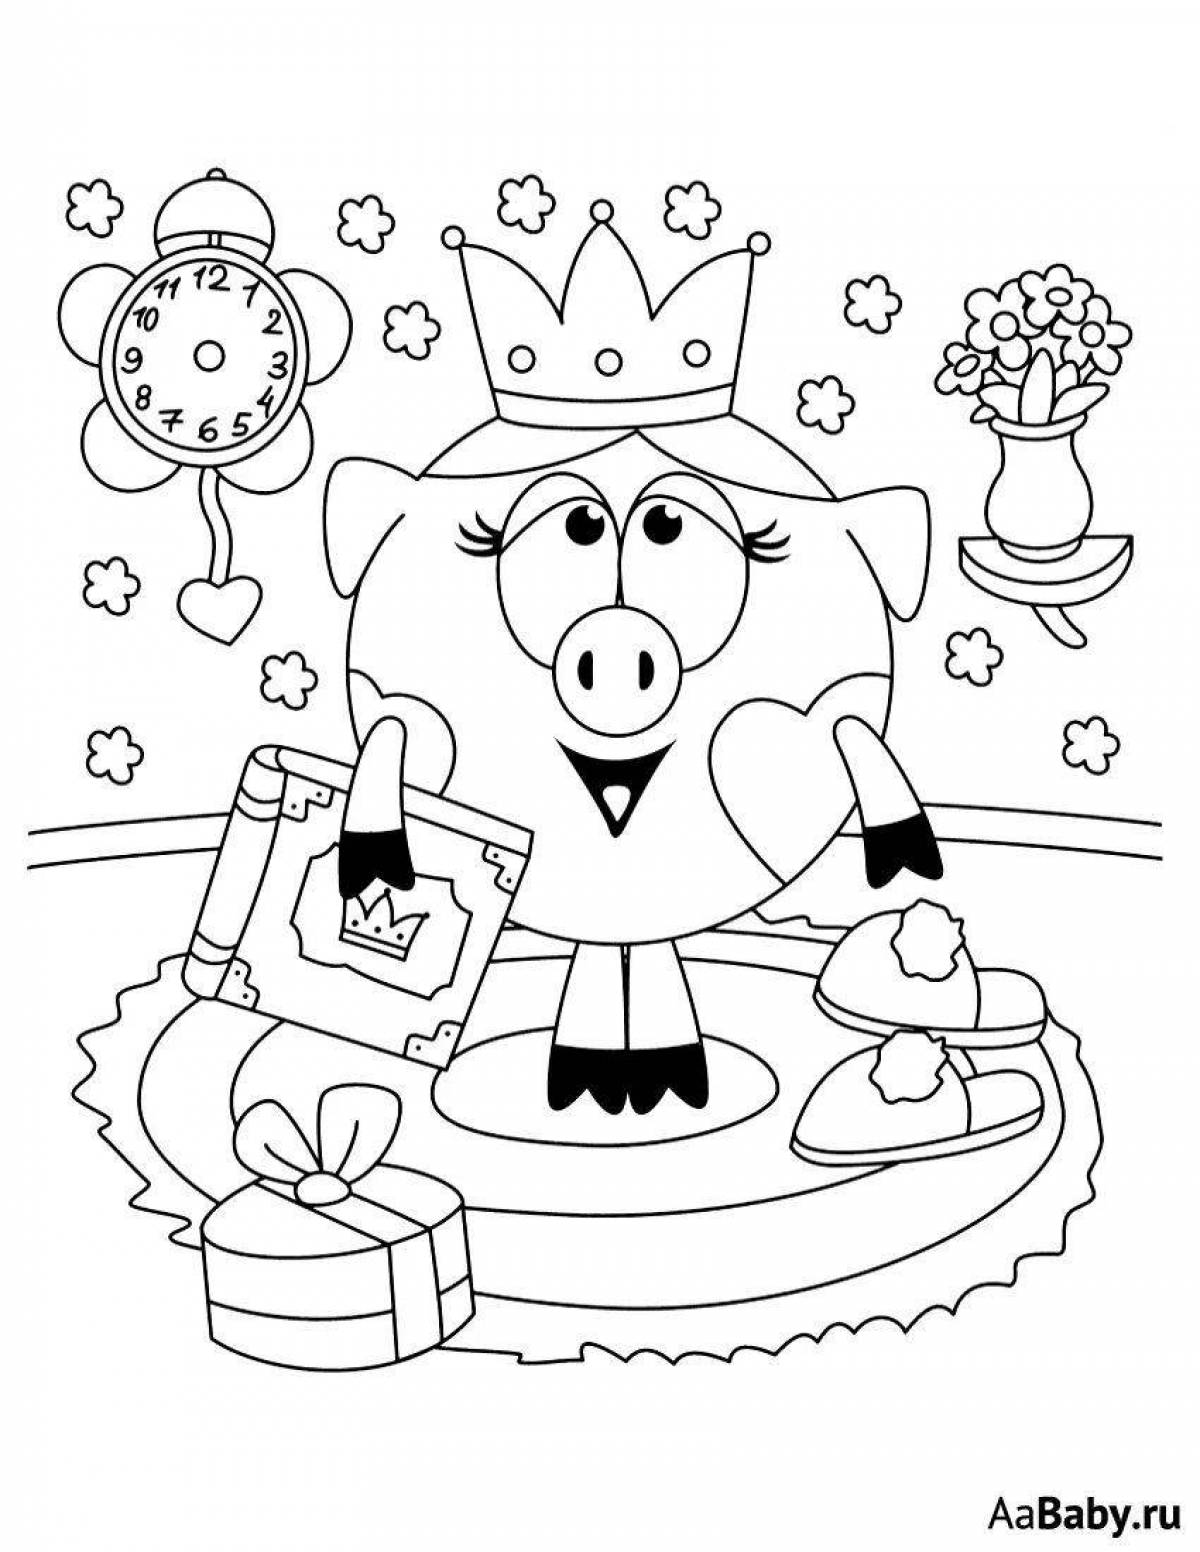 Fun coloring book smart for 5 year olds